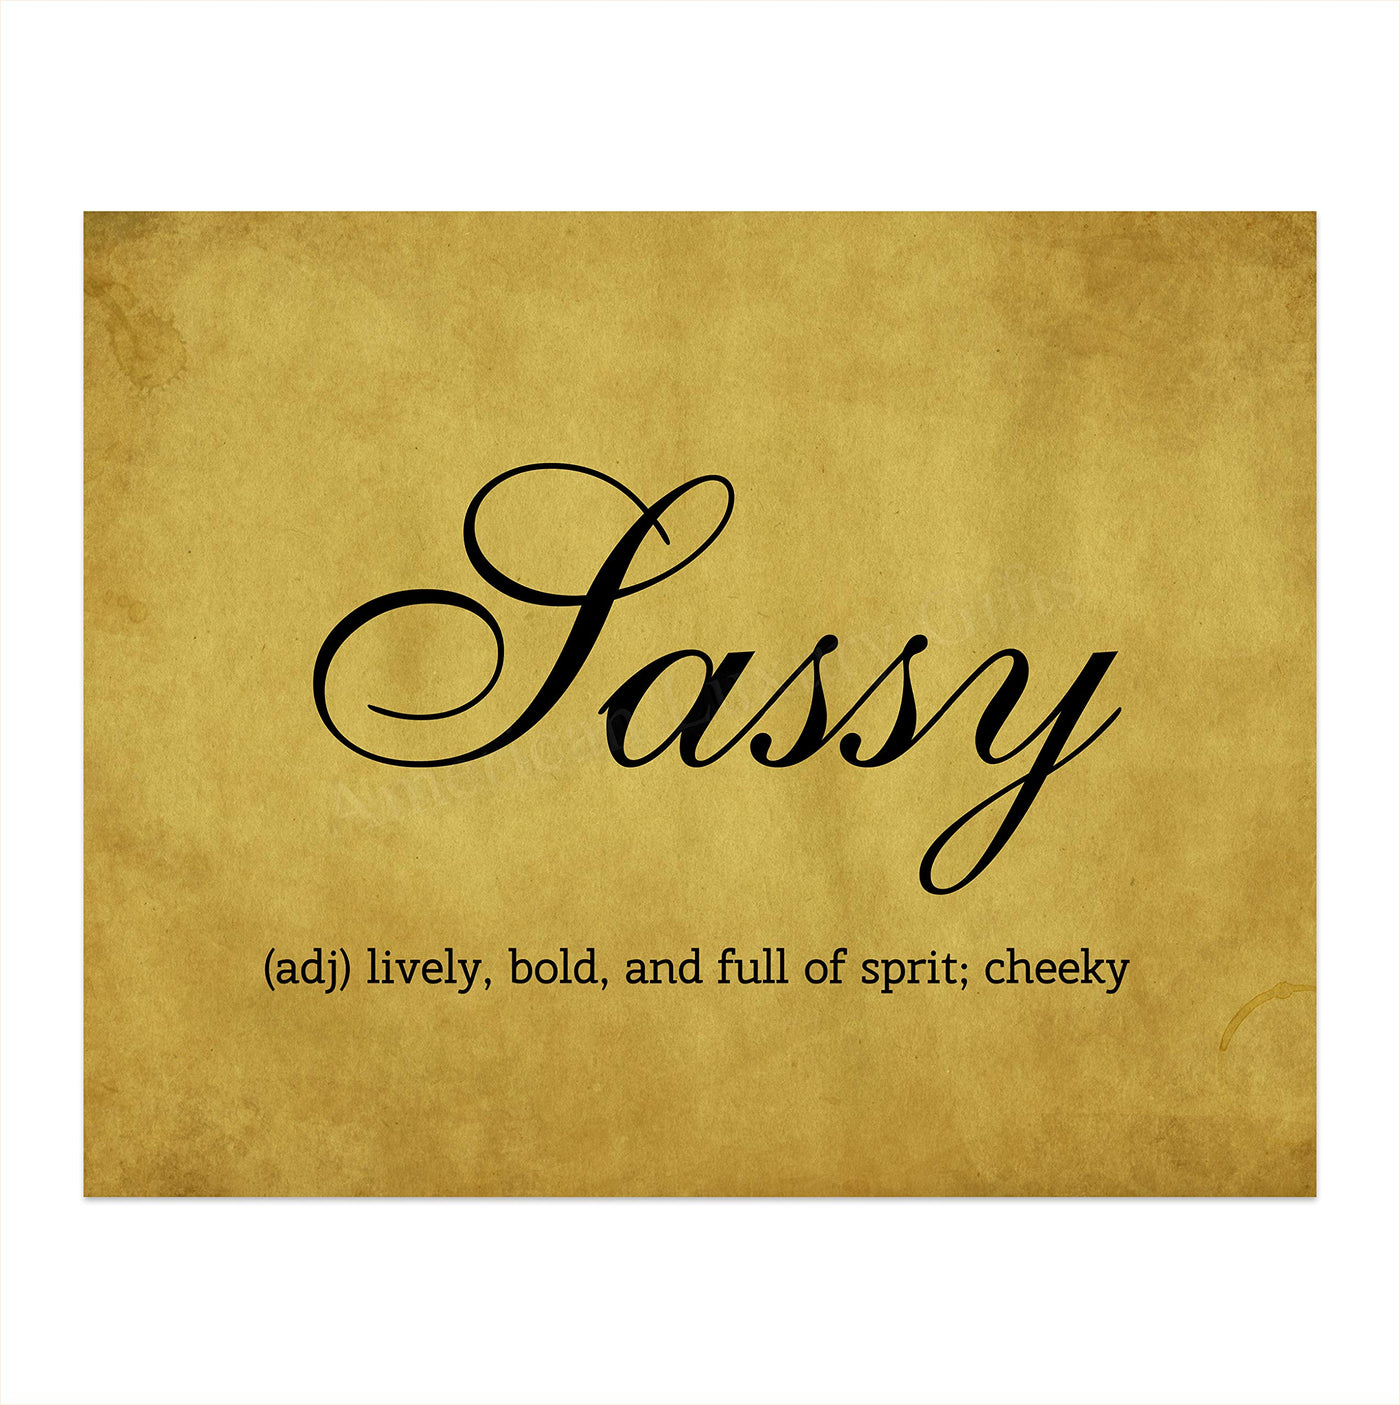 Sassy-Lively-Bold-Full of Spirit-Cheeky-10 x 8" Humorous Wall Art Sign-Ready to Frame. Typographic Print w/Replica Weathered Parchment Design. Perfect Home-Office-Studio-Guest Room-She Shed Decor.